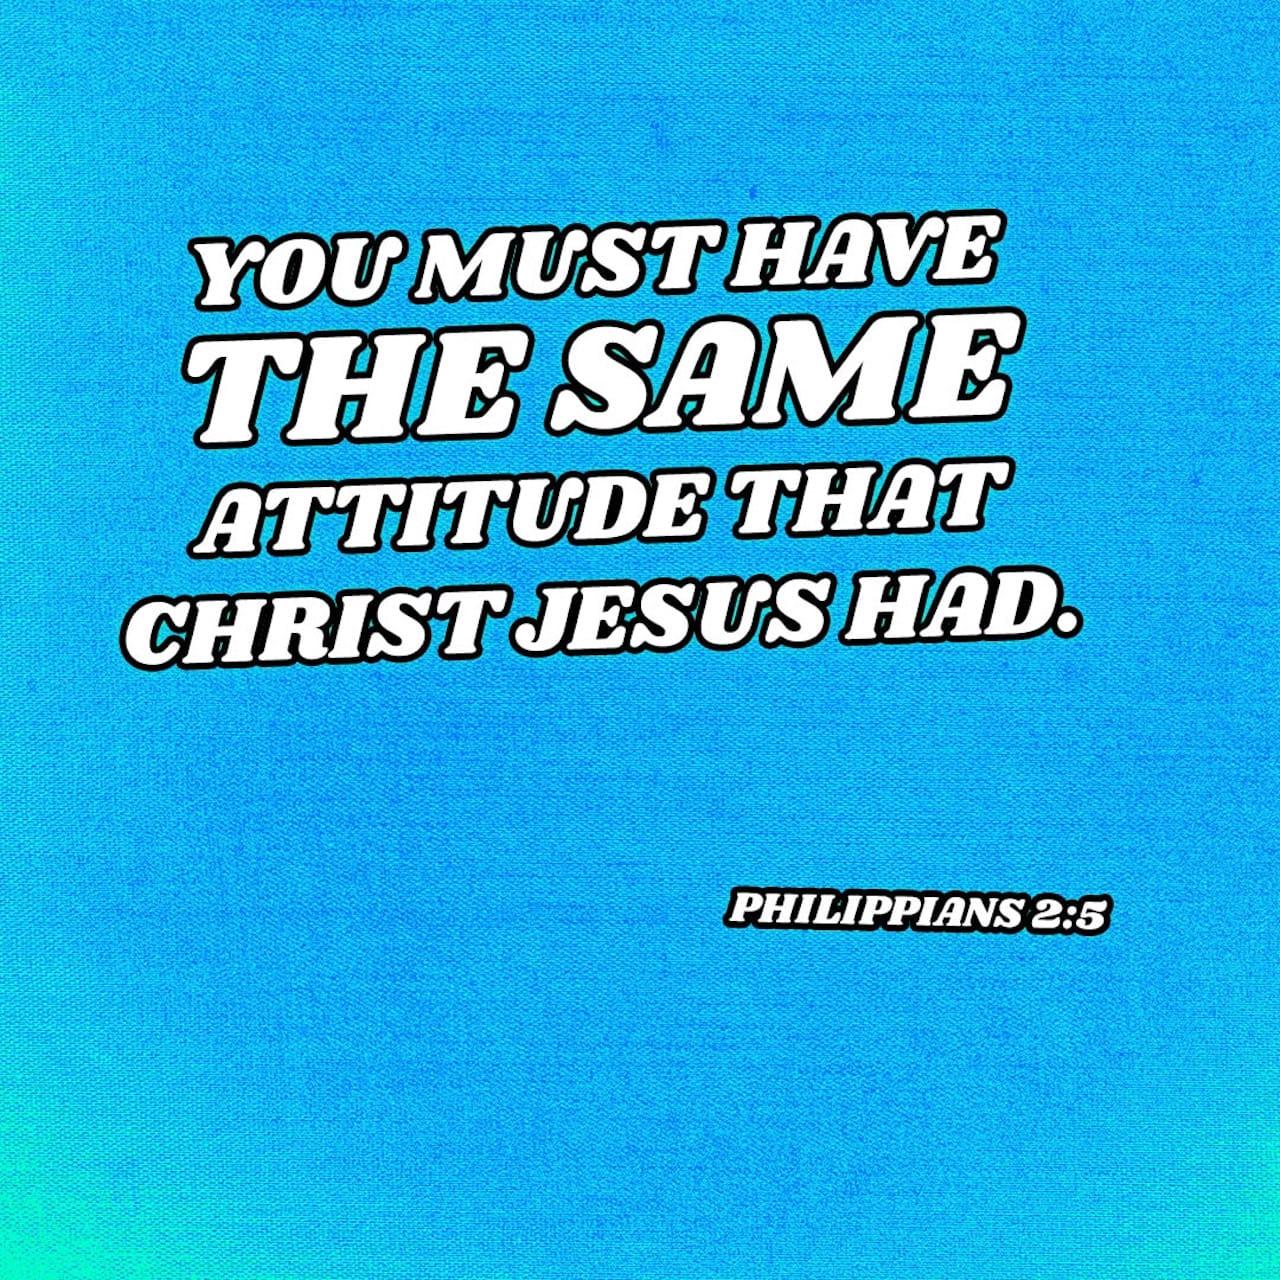 Bible Verse of the Day - day 84 - image 81657 (Philippians 2:5)